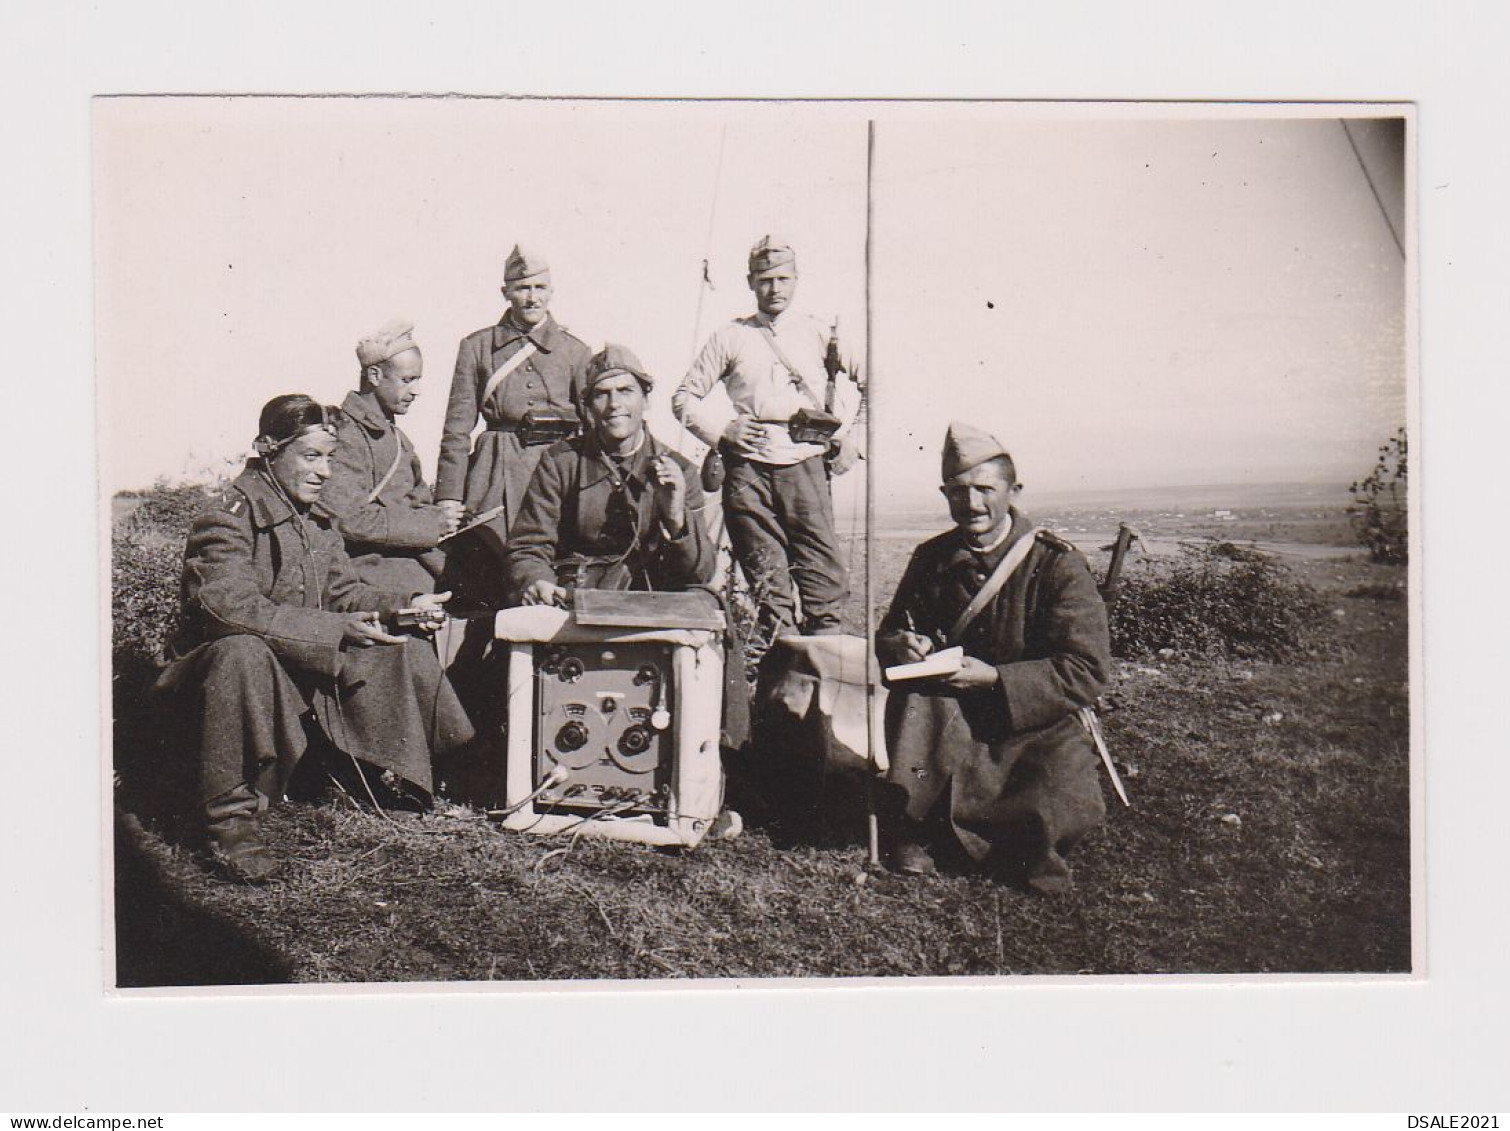 Ww2 Bulgaria Bulgarian Military Soldiers With Field Radio, Scene, Vintage Orig Photo 8.1x5.5cm. (51739) - Guerre, Militaire